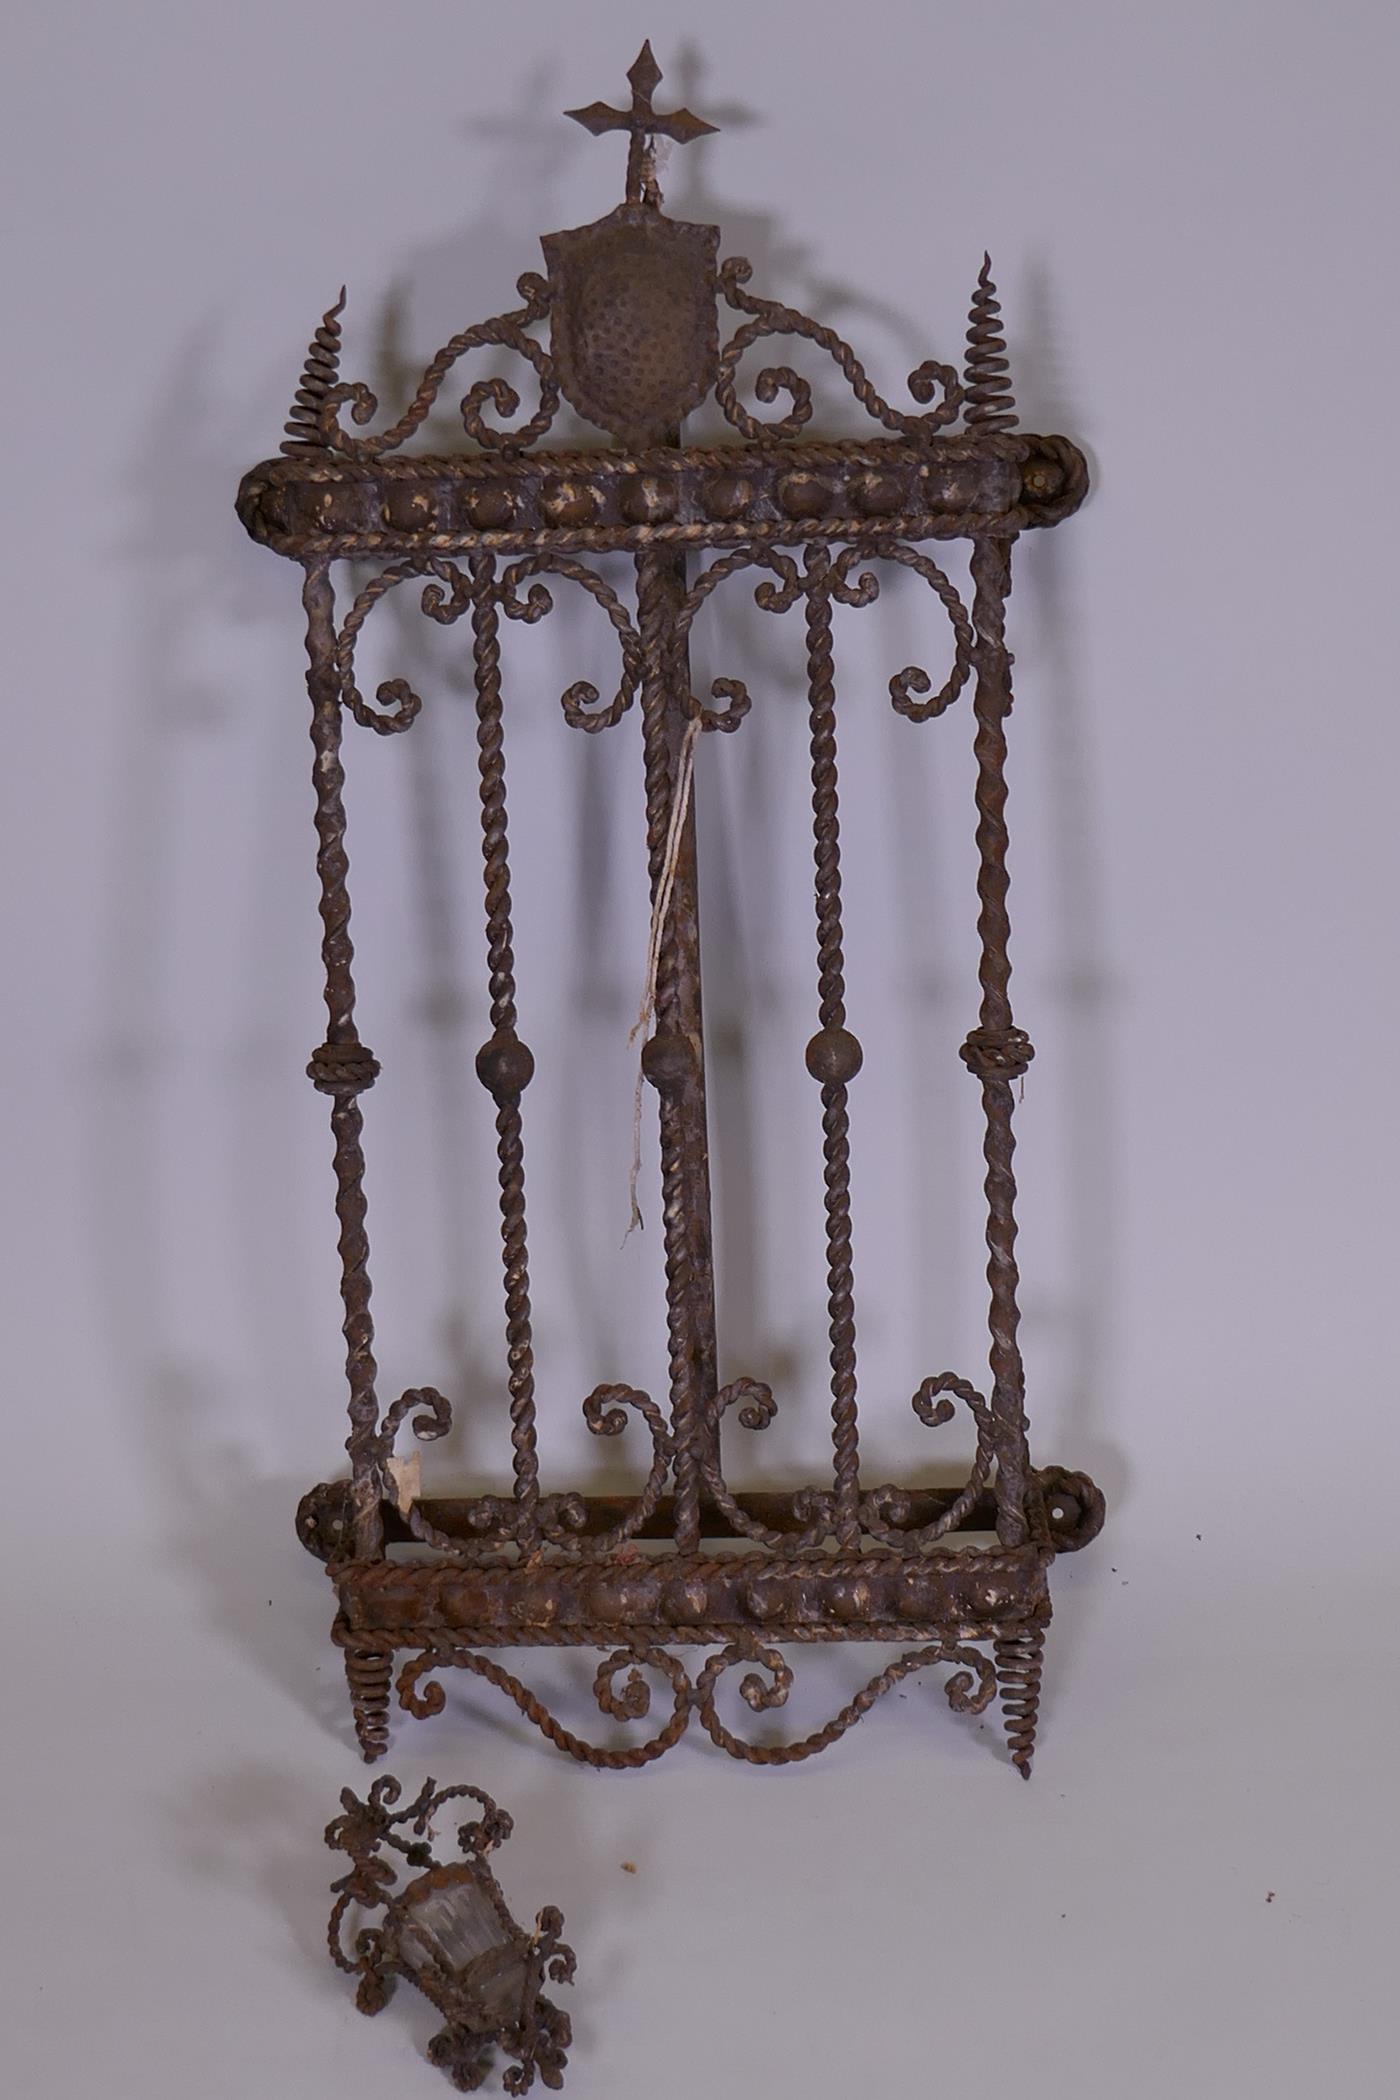 A vintage wall mounted wrought metal garden bracket, with night light holder, 34" x 15" x 6" - Image 2 of 3